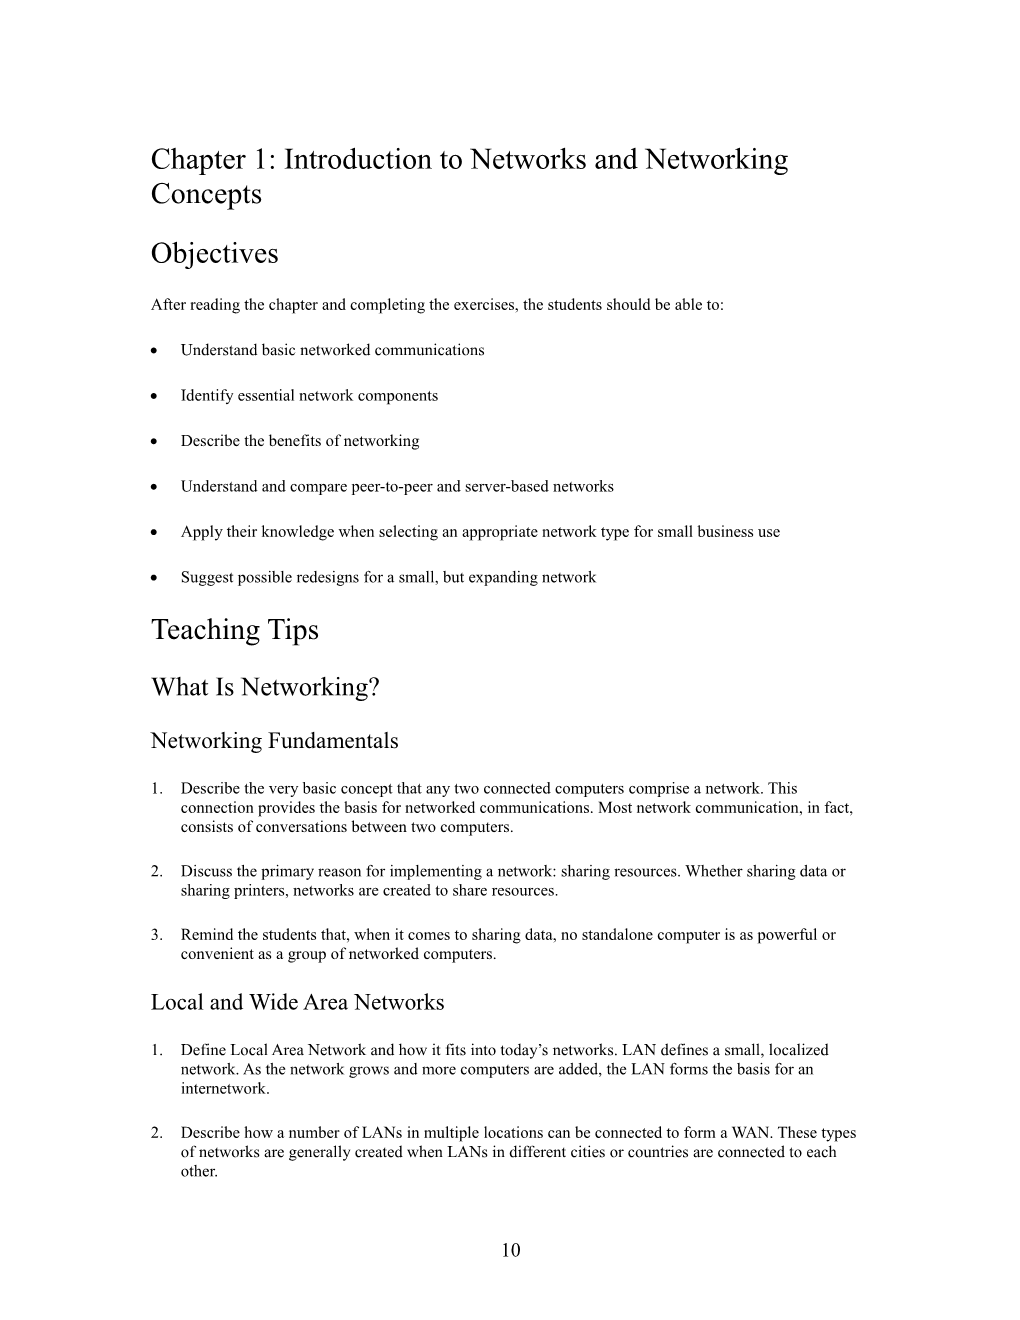 Chapter 1: Introduction to Networks and Networking Concepts